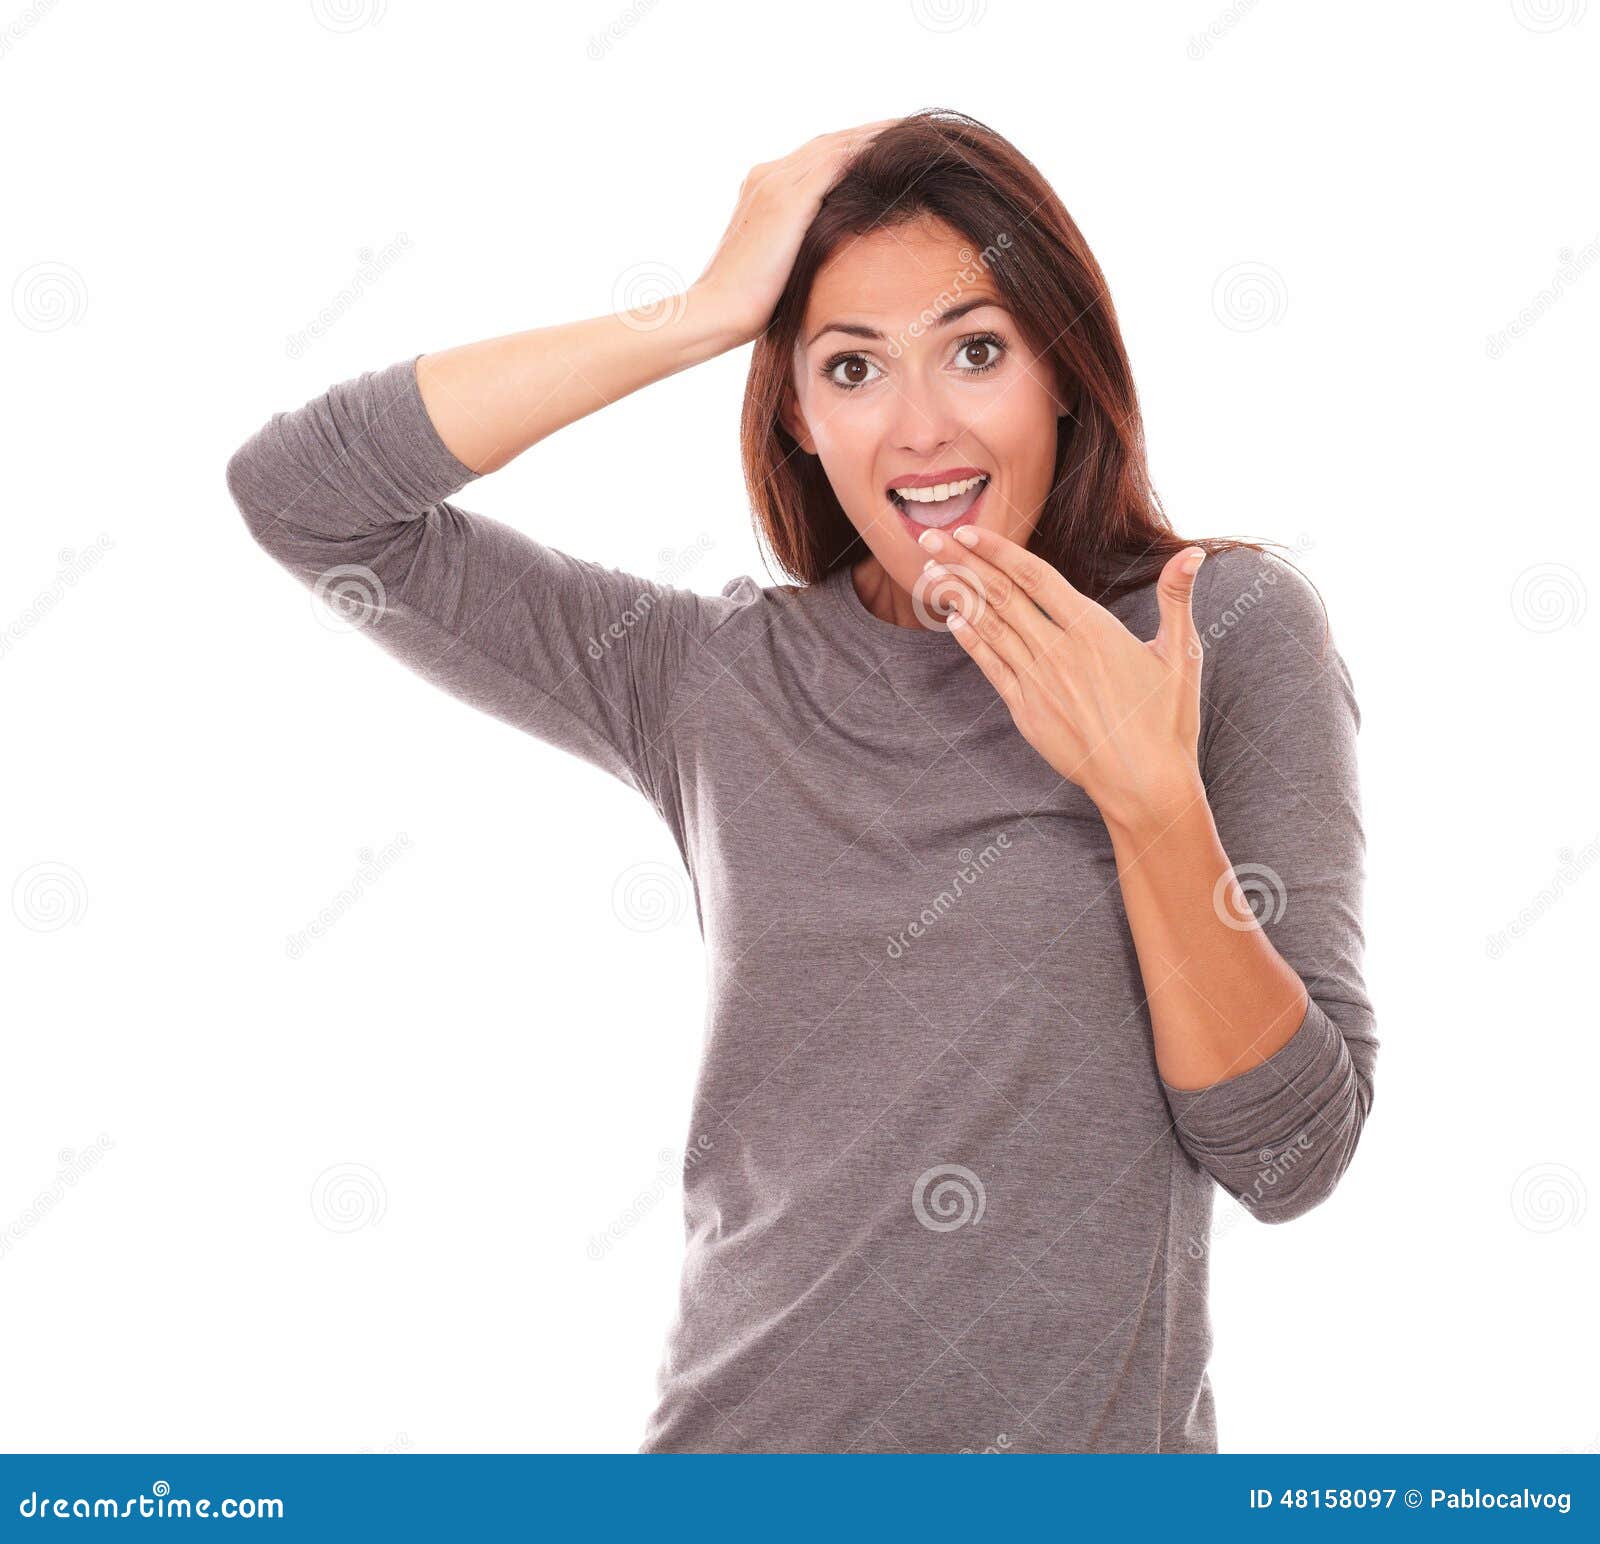 Cute Female Looking Embarrassed With Hand On Mouth Royalty Free Stock